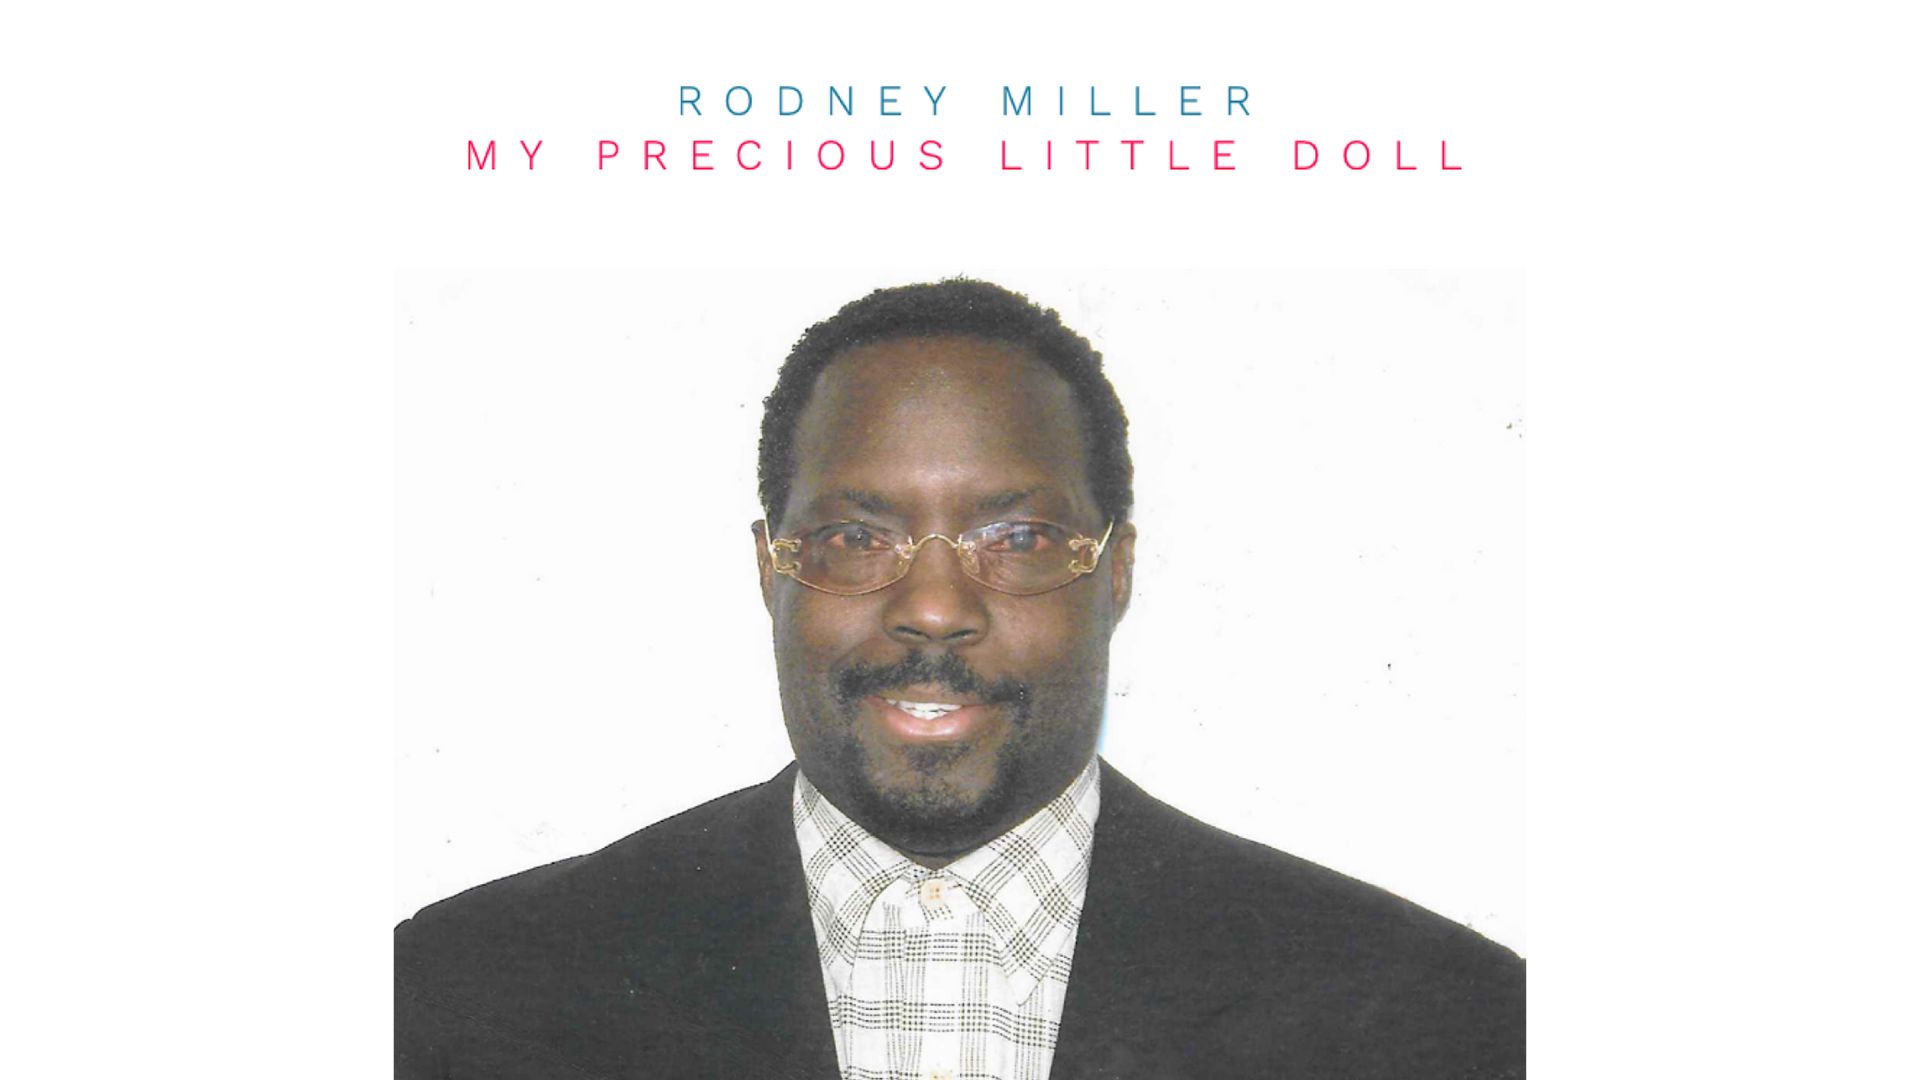 The new single ‘My Precious Little Doll’ from ‘Rodney Miller’ with it’s sleek and soulful sheen is on the playlist now.